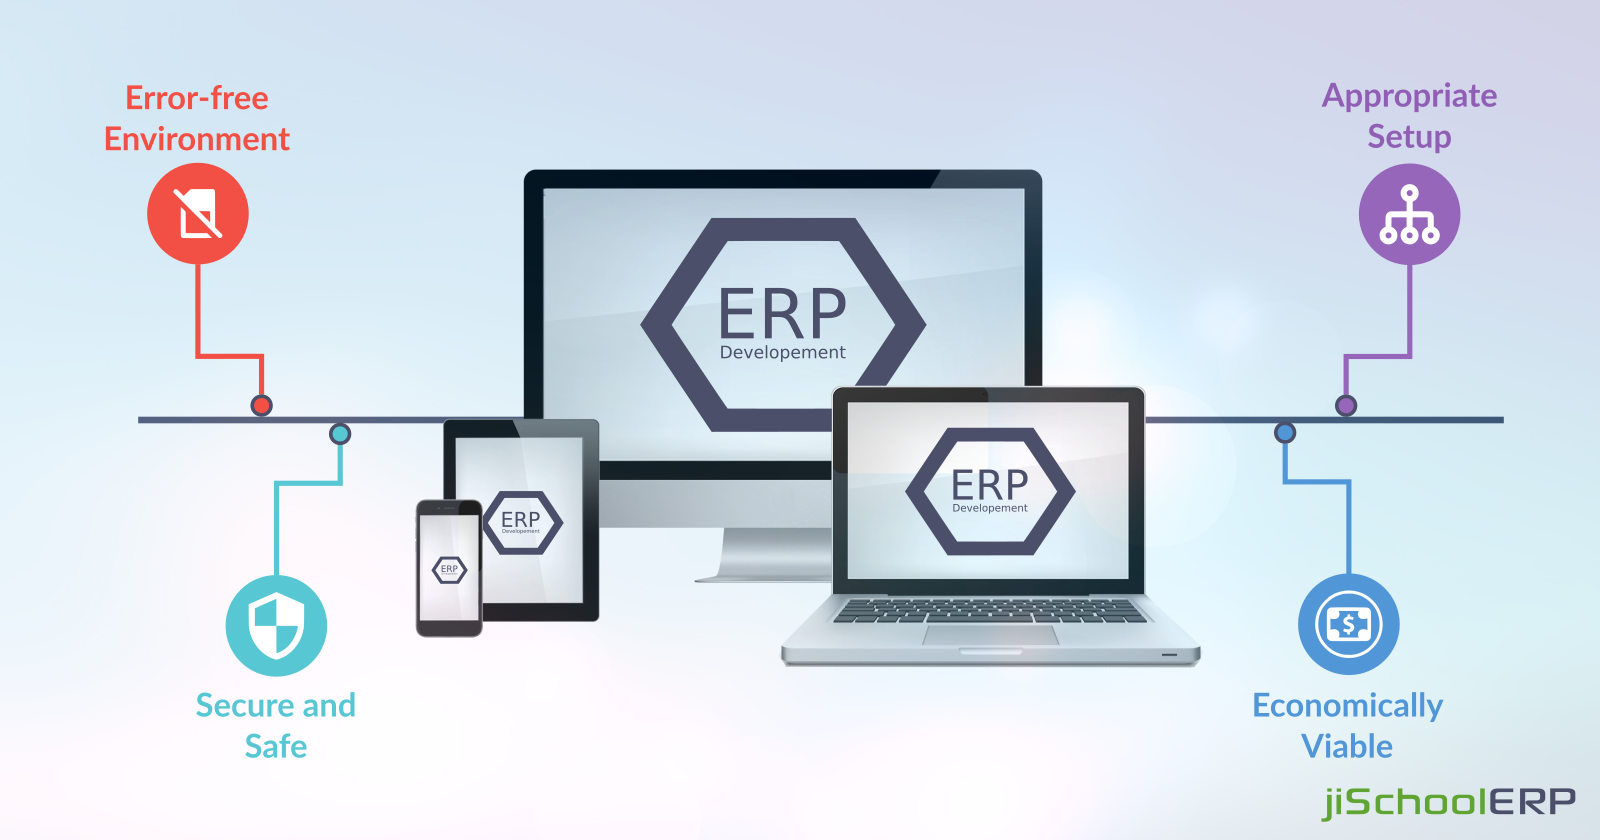 ERP SOFTWARE - Is It Worth for School Management?